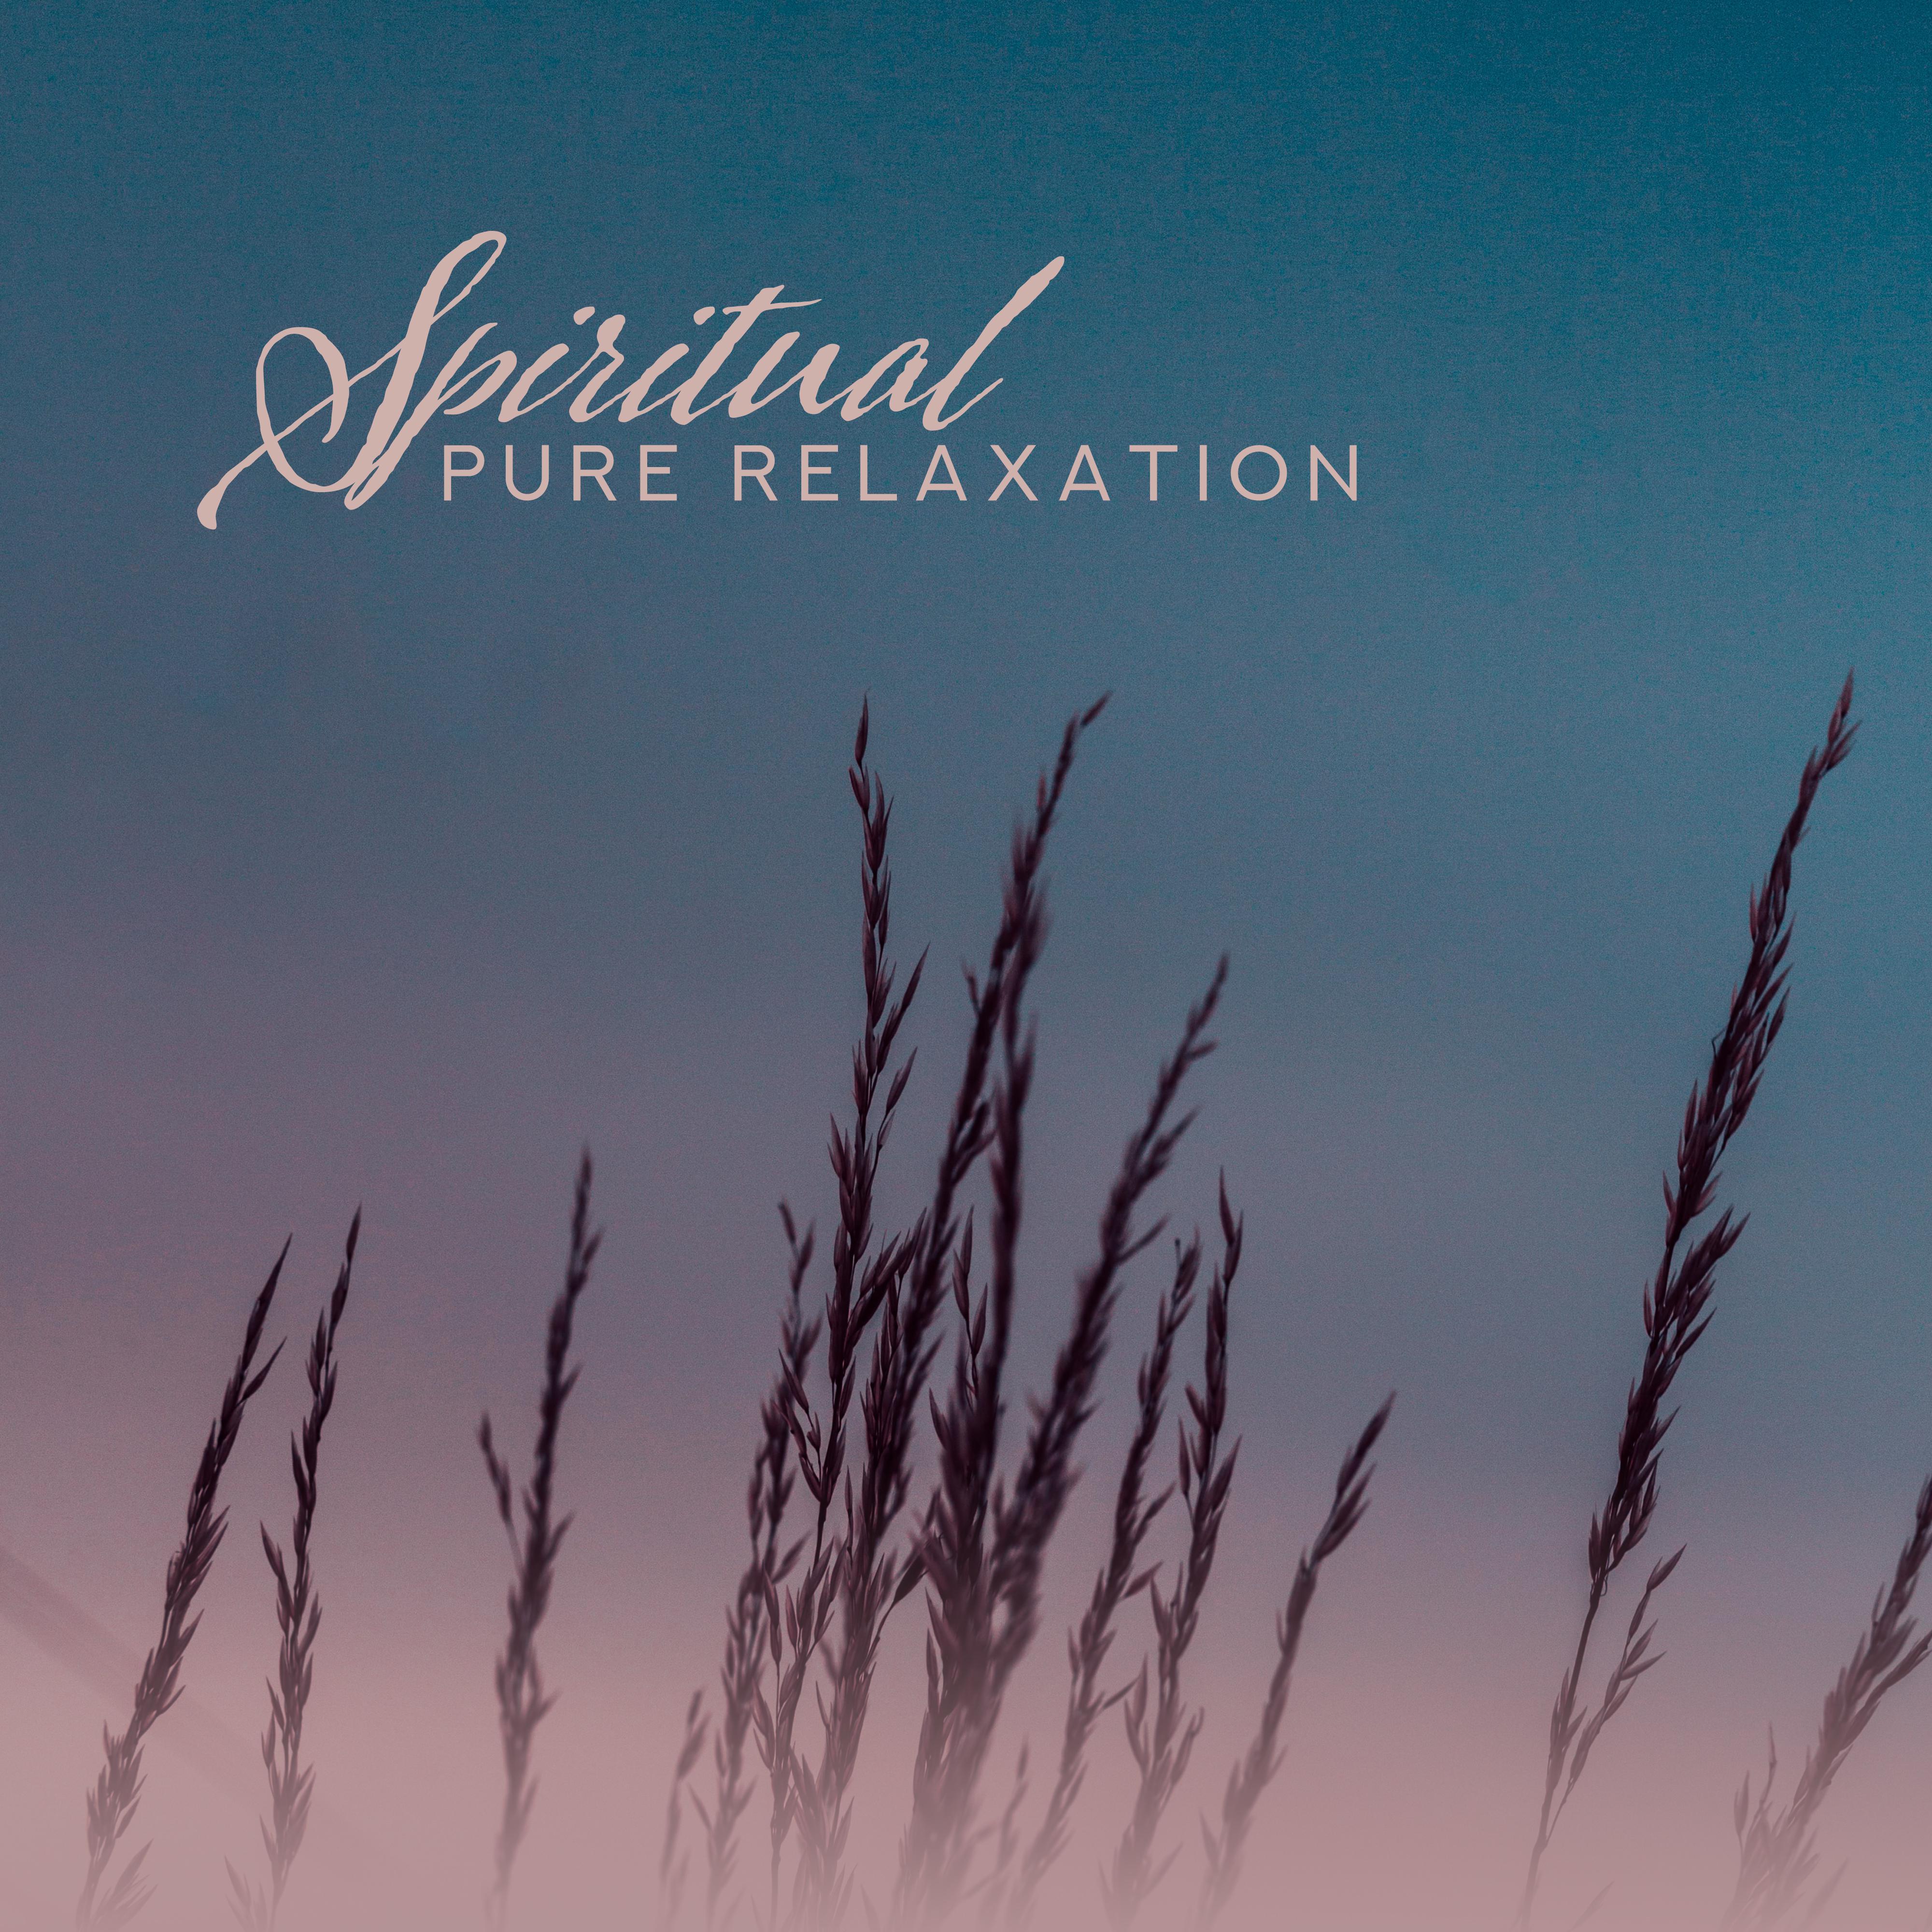 Spiritual Pure Relaxation: 2019 New Age Ambient Instrumental Music Collection for Pure Relaxation, Sleep, Rest, Calm Down, Stress Relief, Increase Vital Energy, Soothing Songs Played on Piano, Violin & Sax